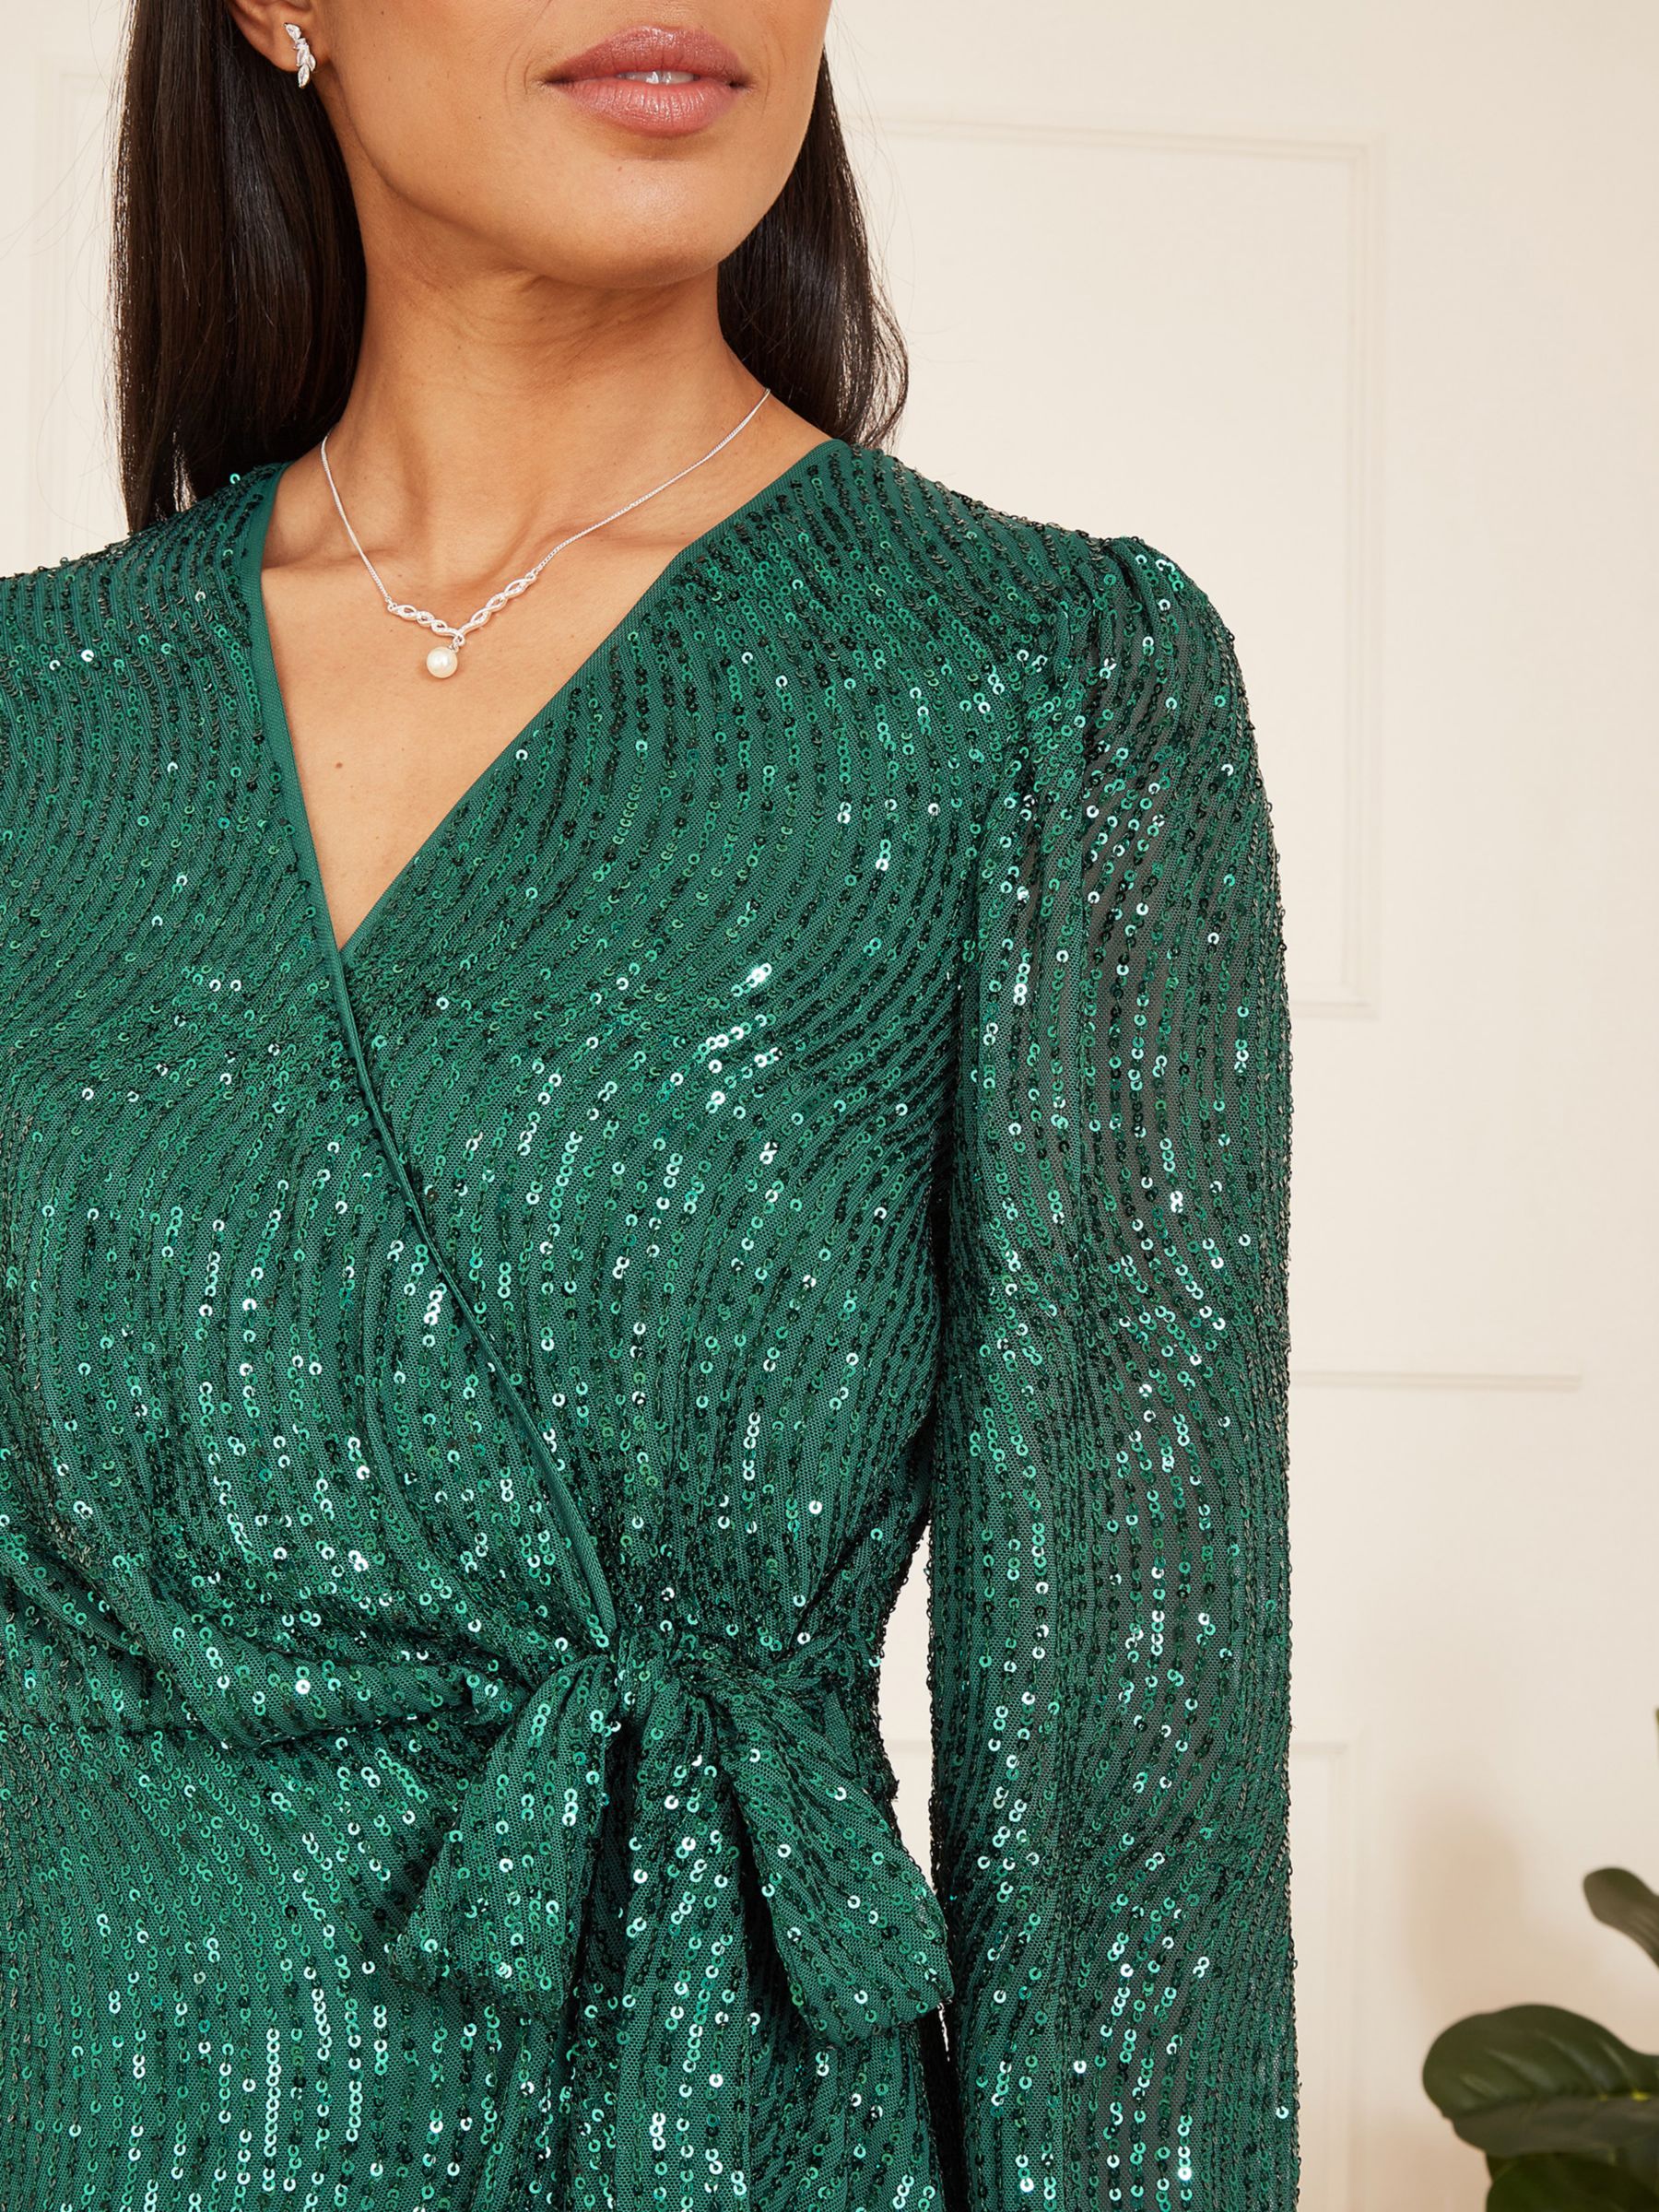 Buy Yumi Sequin Frill Wrap Dress Online at johnlewis.com